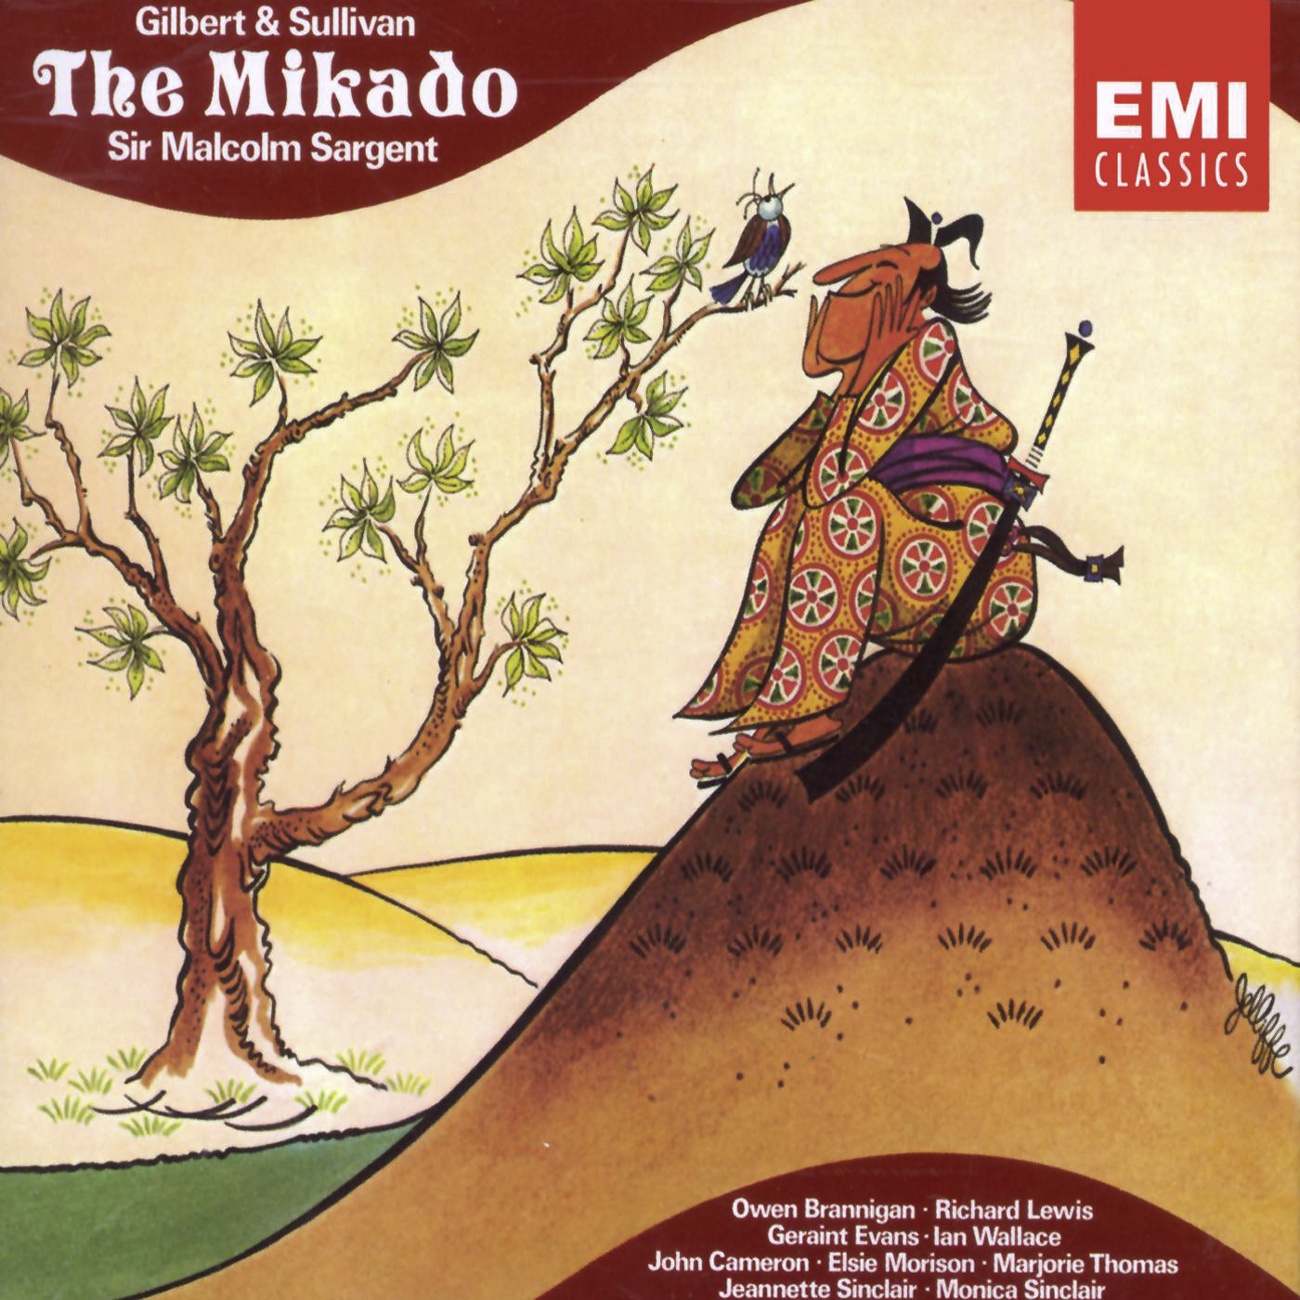 The Mikado (or, The Town of Titipu), Act I: So please you, sir, we much regret (Yum-Yum, Peep-Bo, Pitti-Sing, Pooh-Bah, Girls)